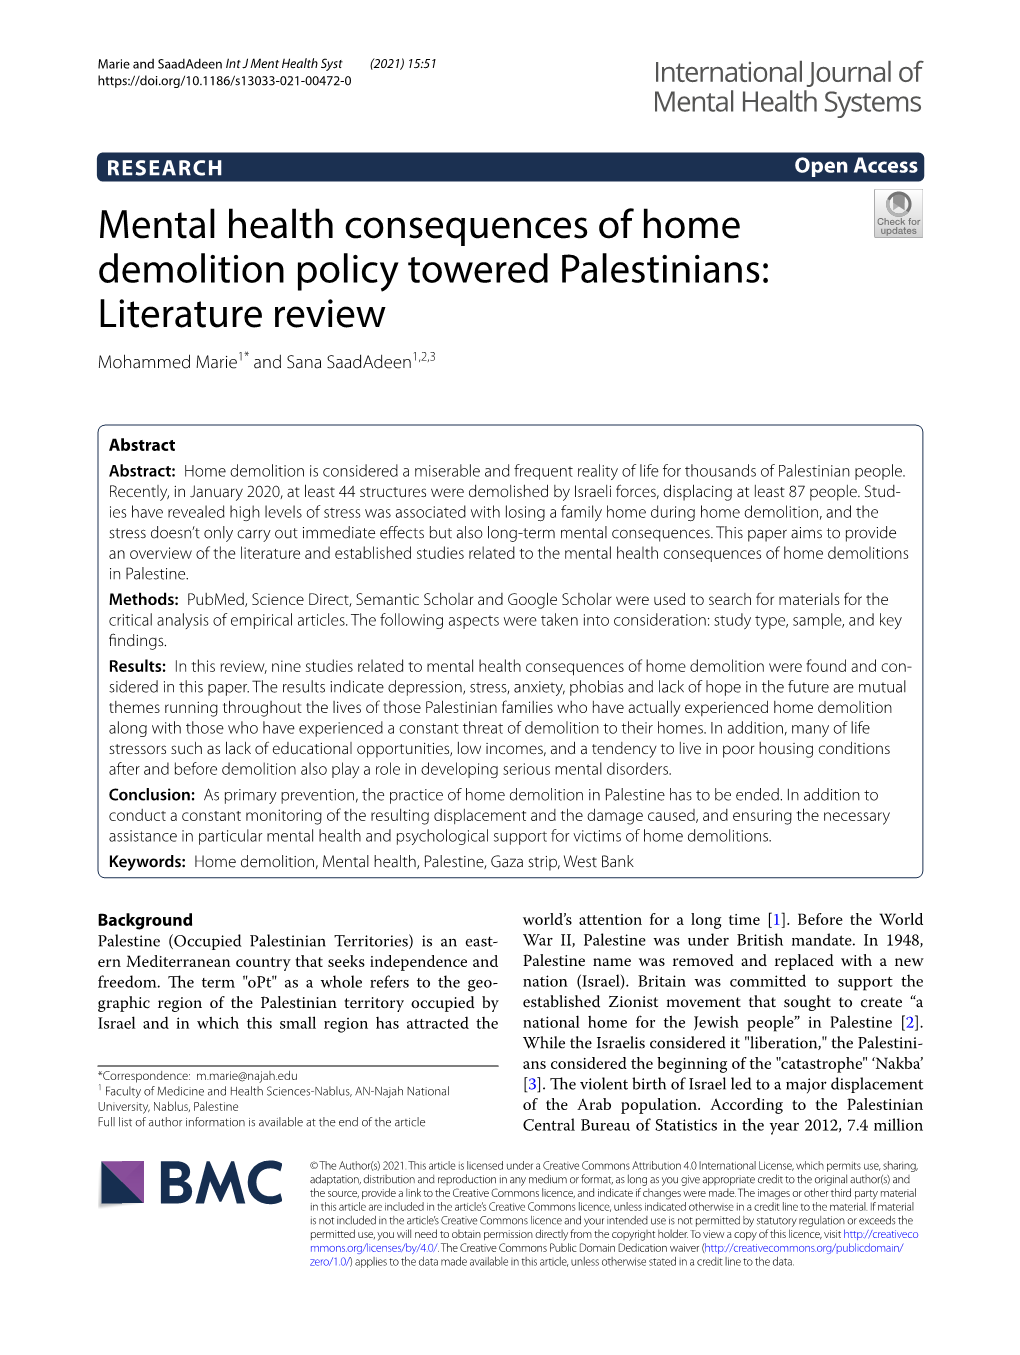 Mental Health Consequences of Home Demolition Policy Towered Palestinians: Literature Review Mohammed Marie1* and Sana Saadadeen1,2,3